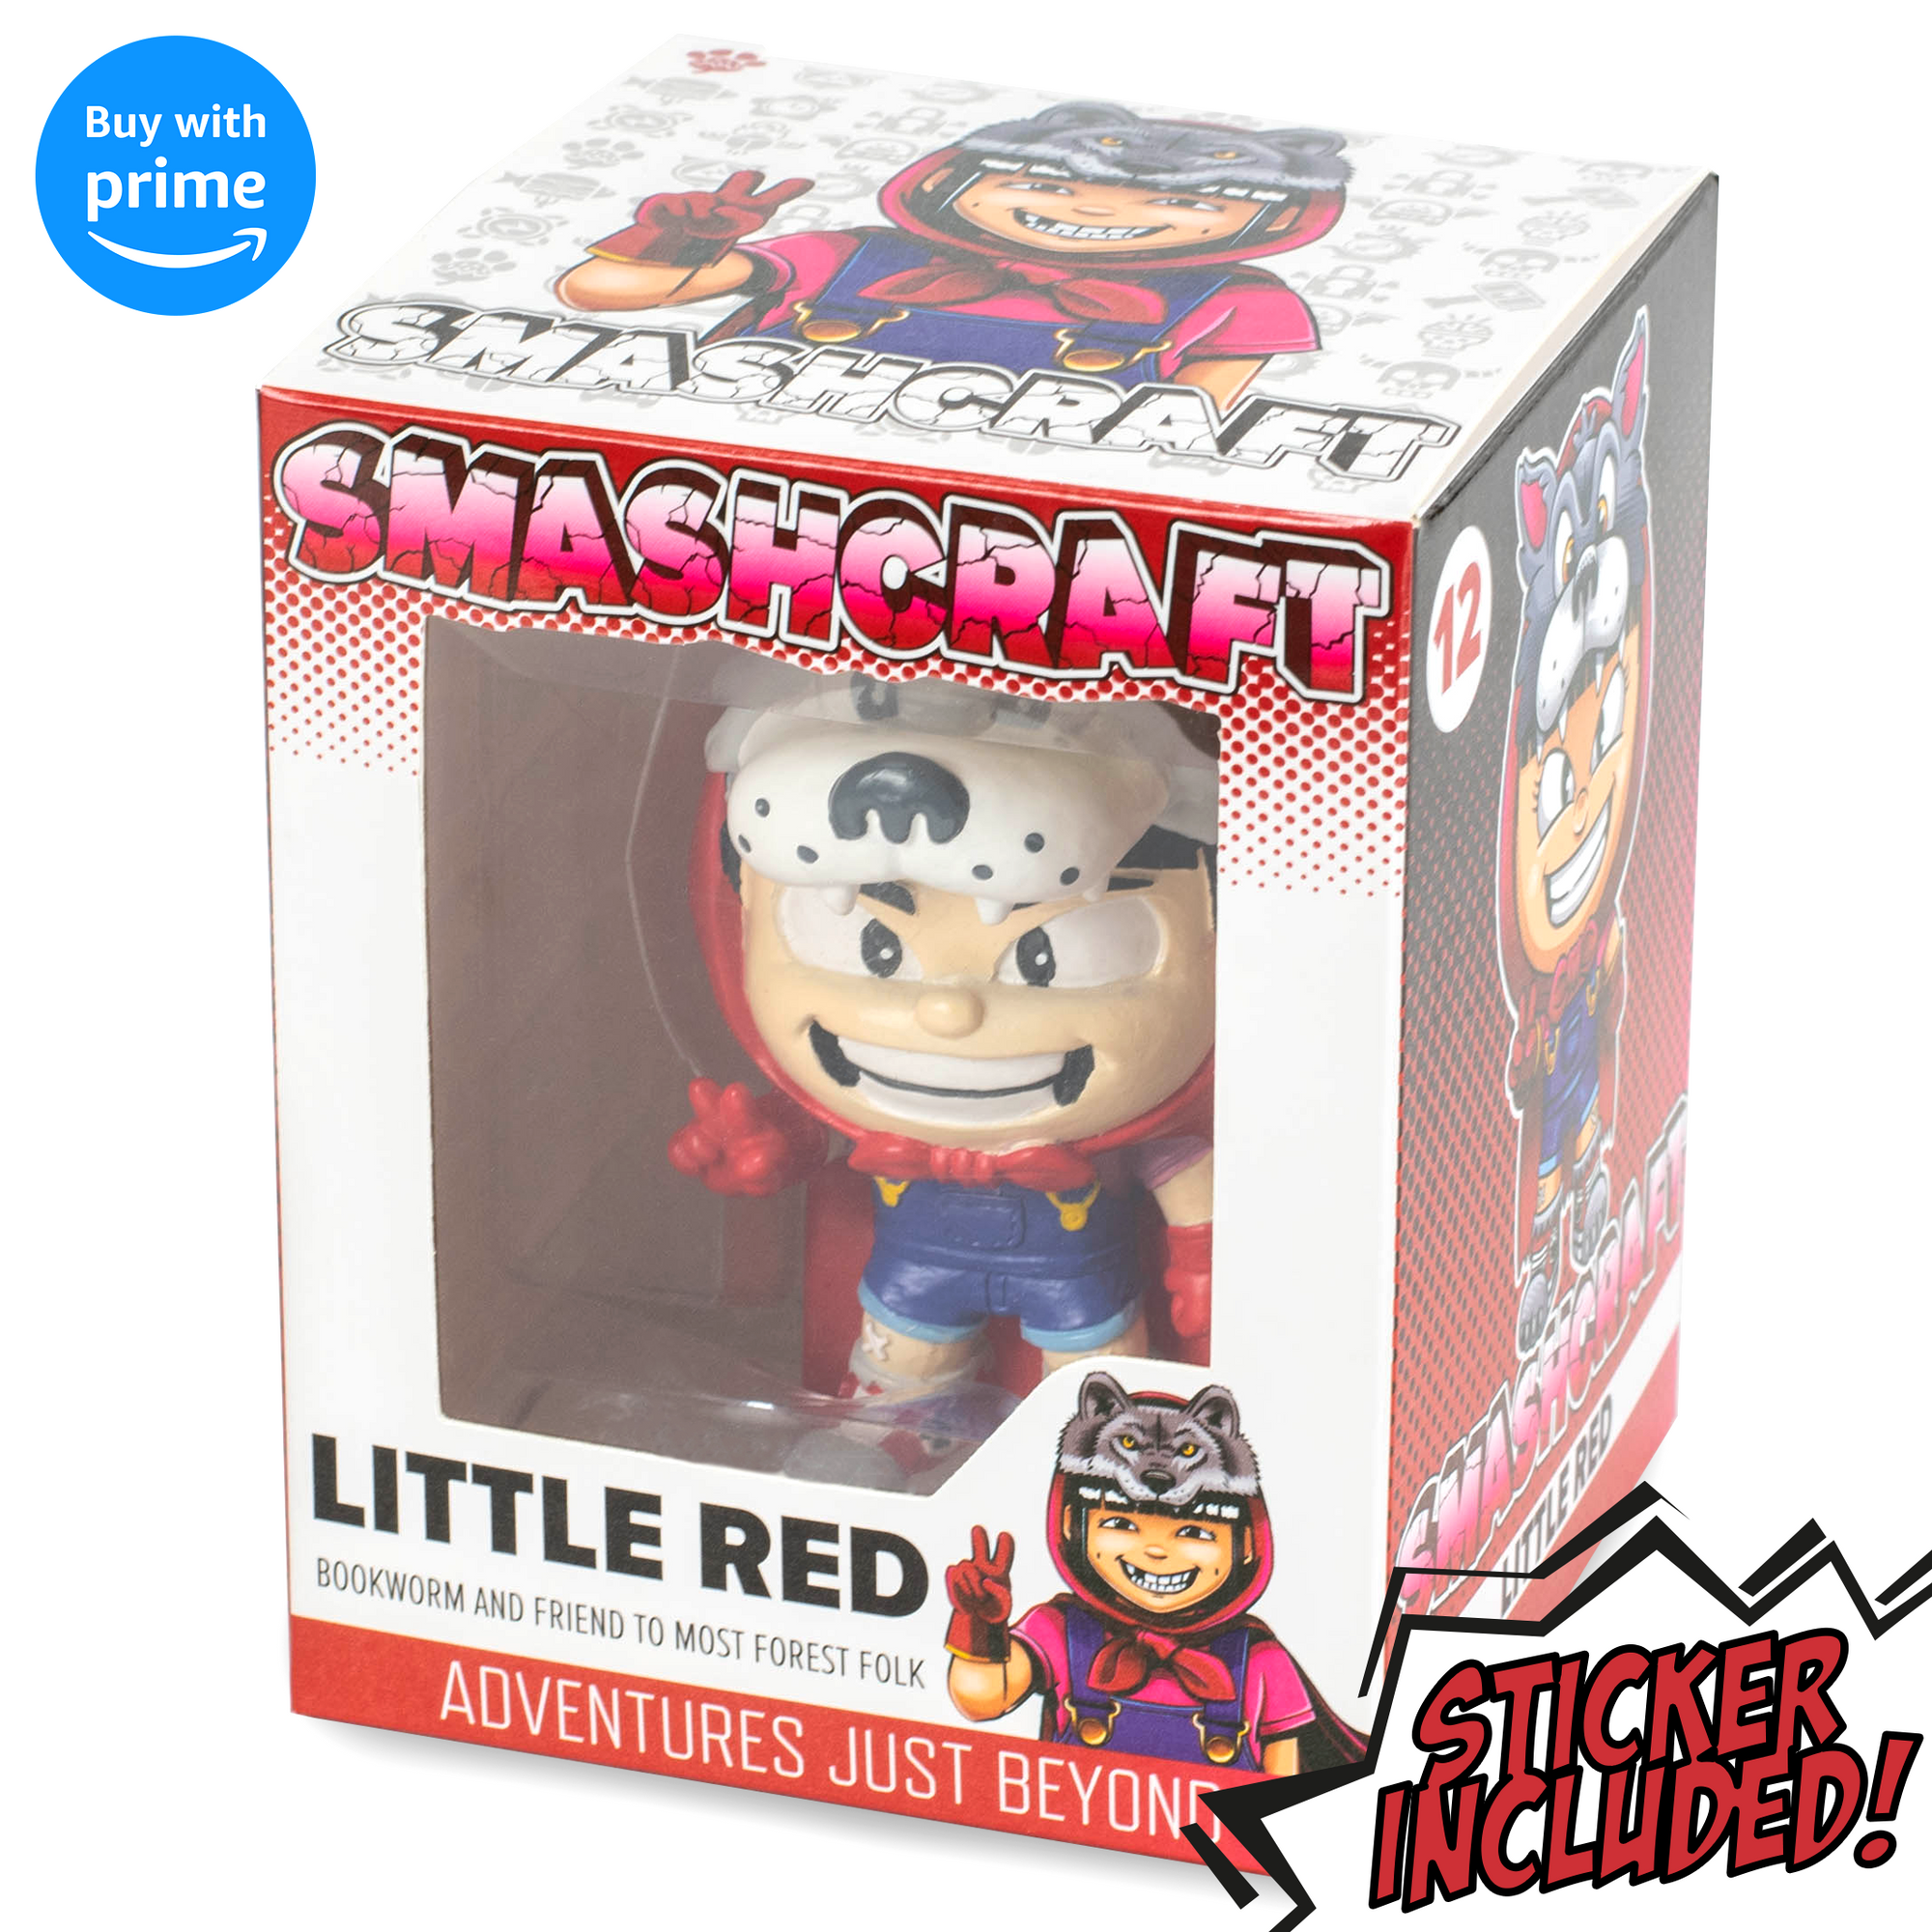 Smashcraft Little Red collectors box, with back story and memorabilia fairytale character sticker 